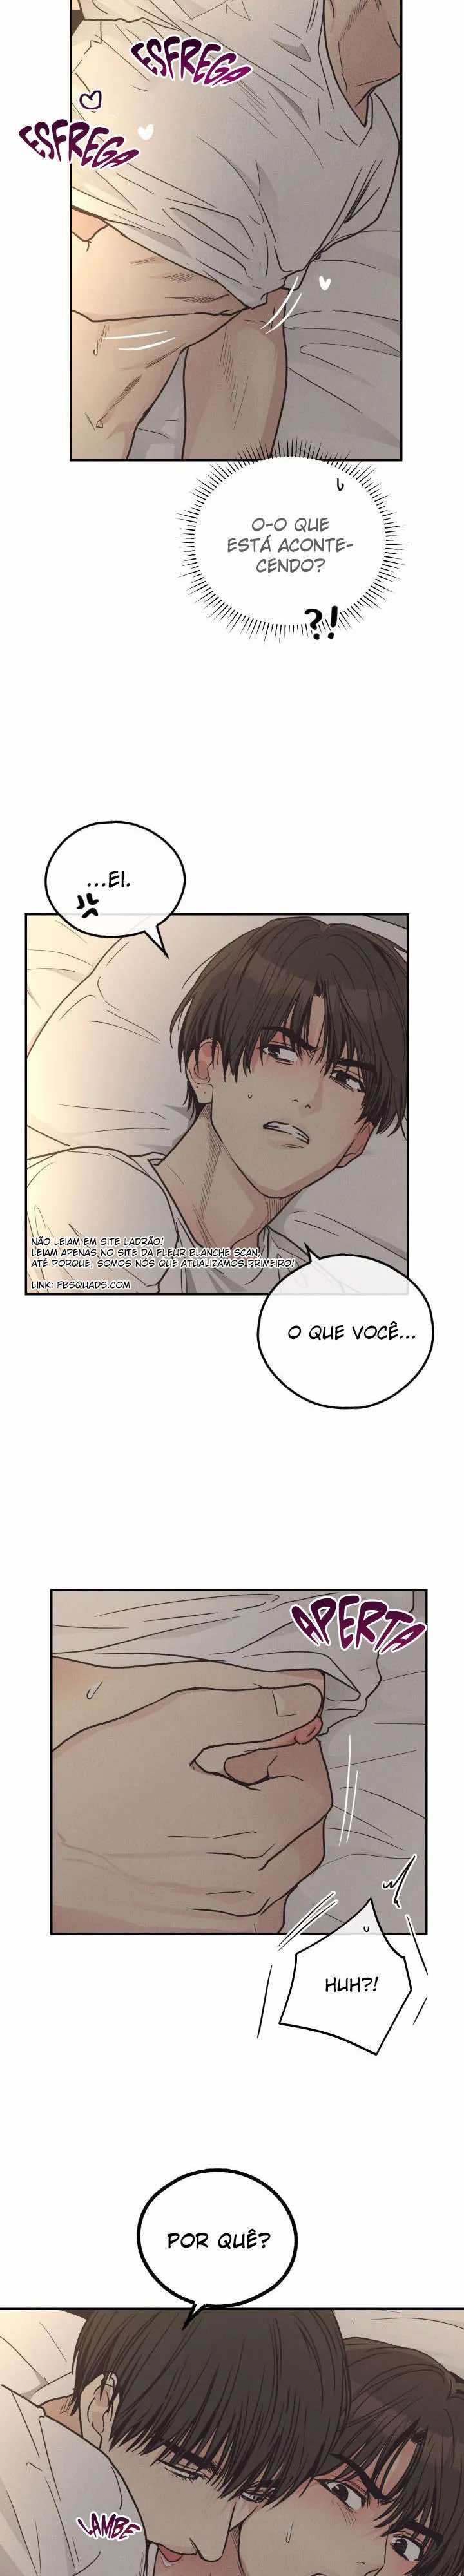 I Really Like You - Capitulo 06 - Fleur Blanche Scan